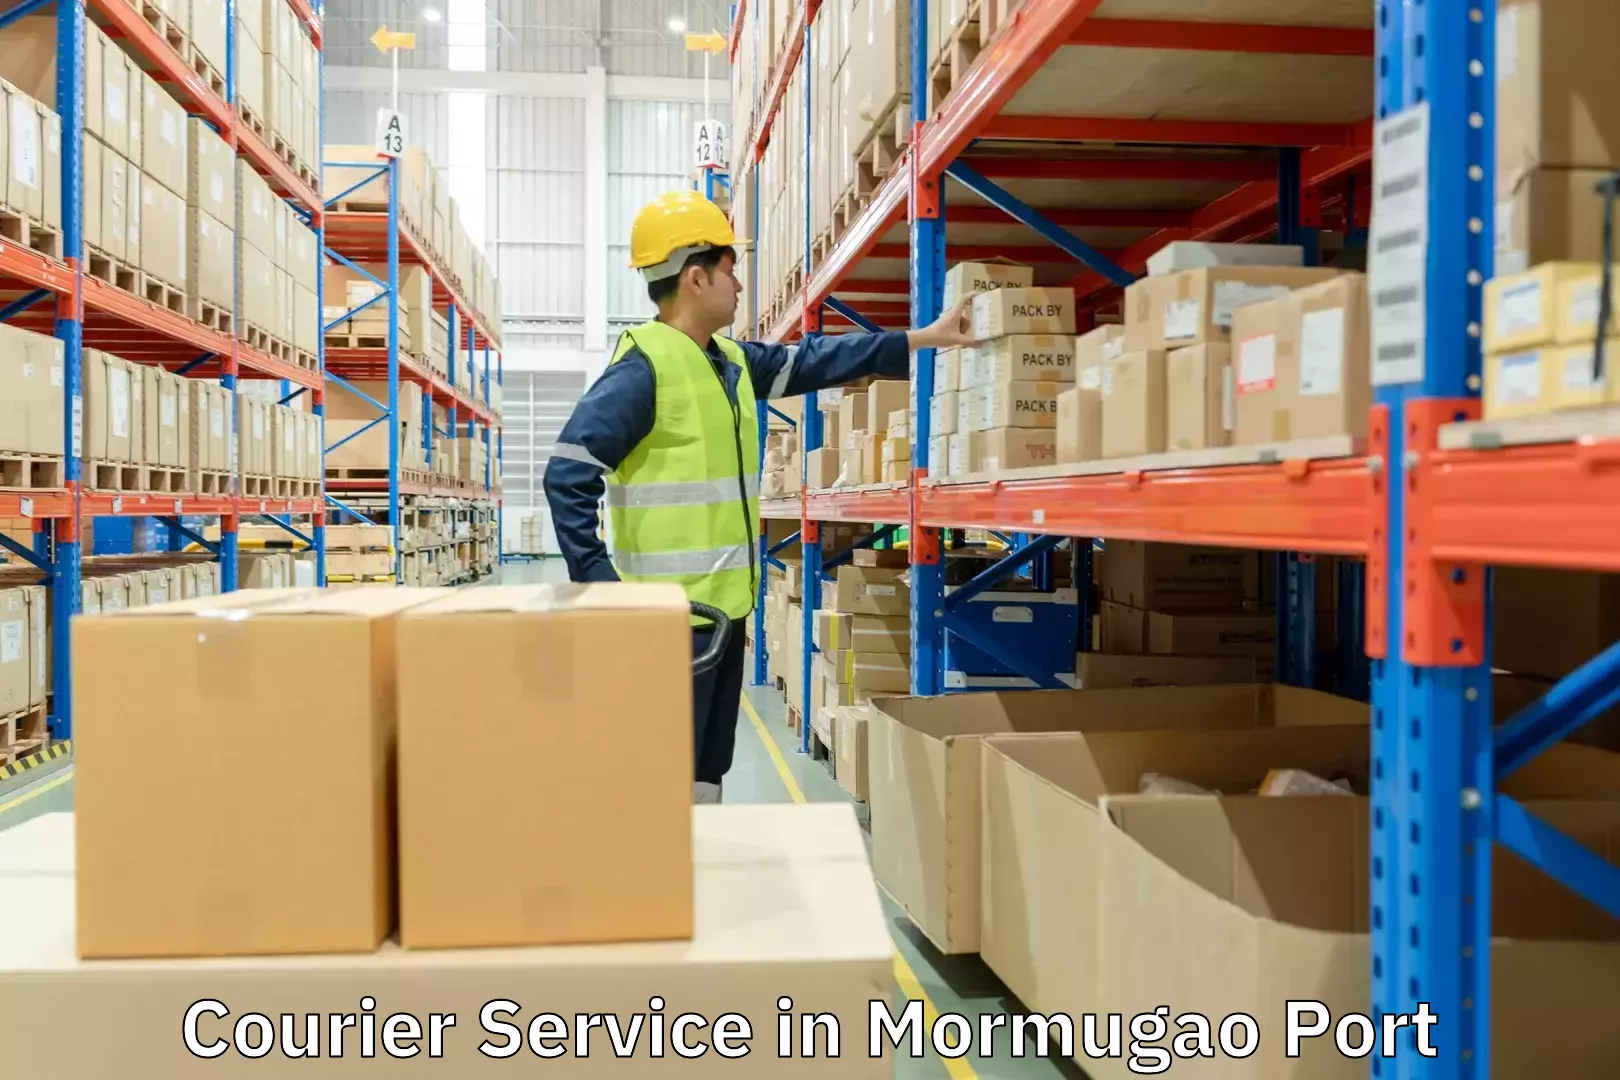 Courier tracking online in Mormugao Port